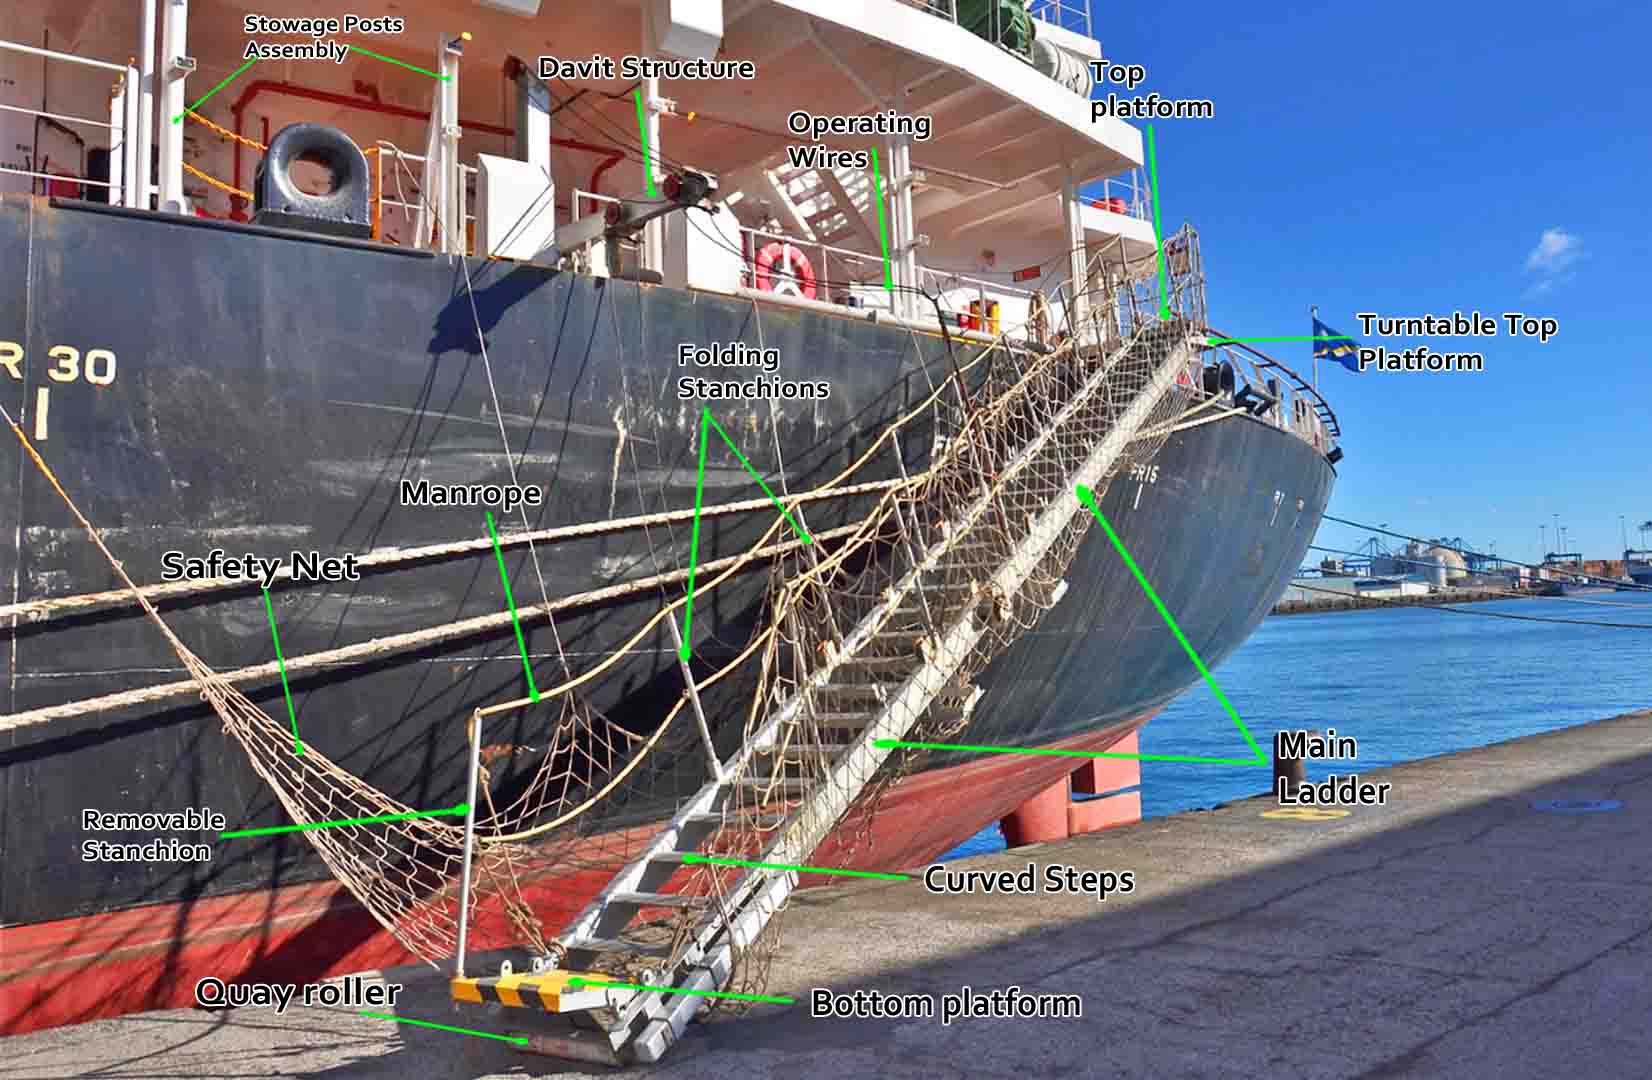 An image showing the main parts of an accommodation ladder while it is deployed on the ship's jetty.